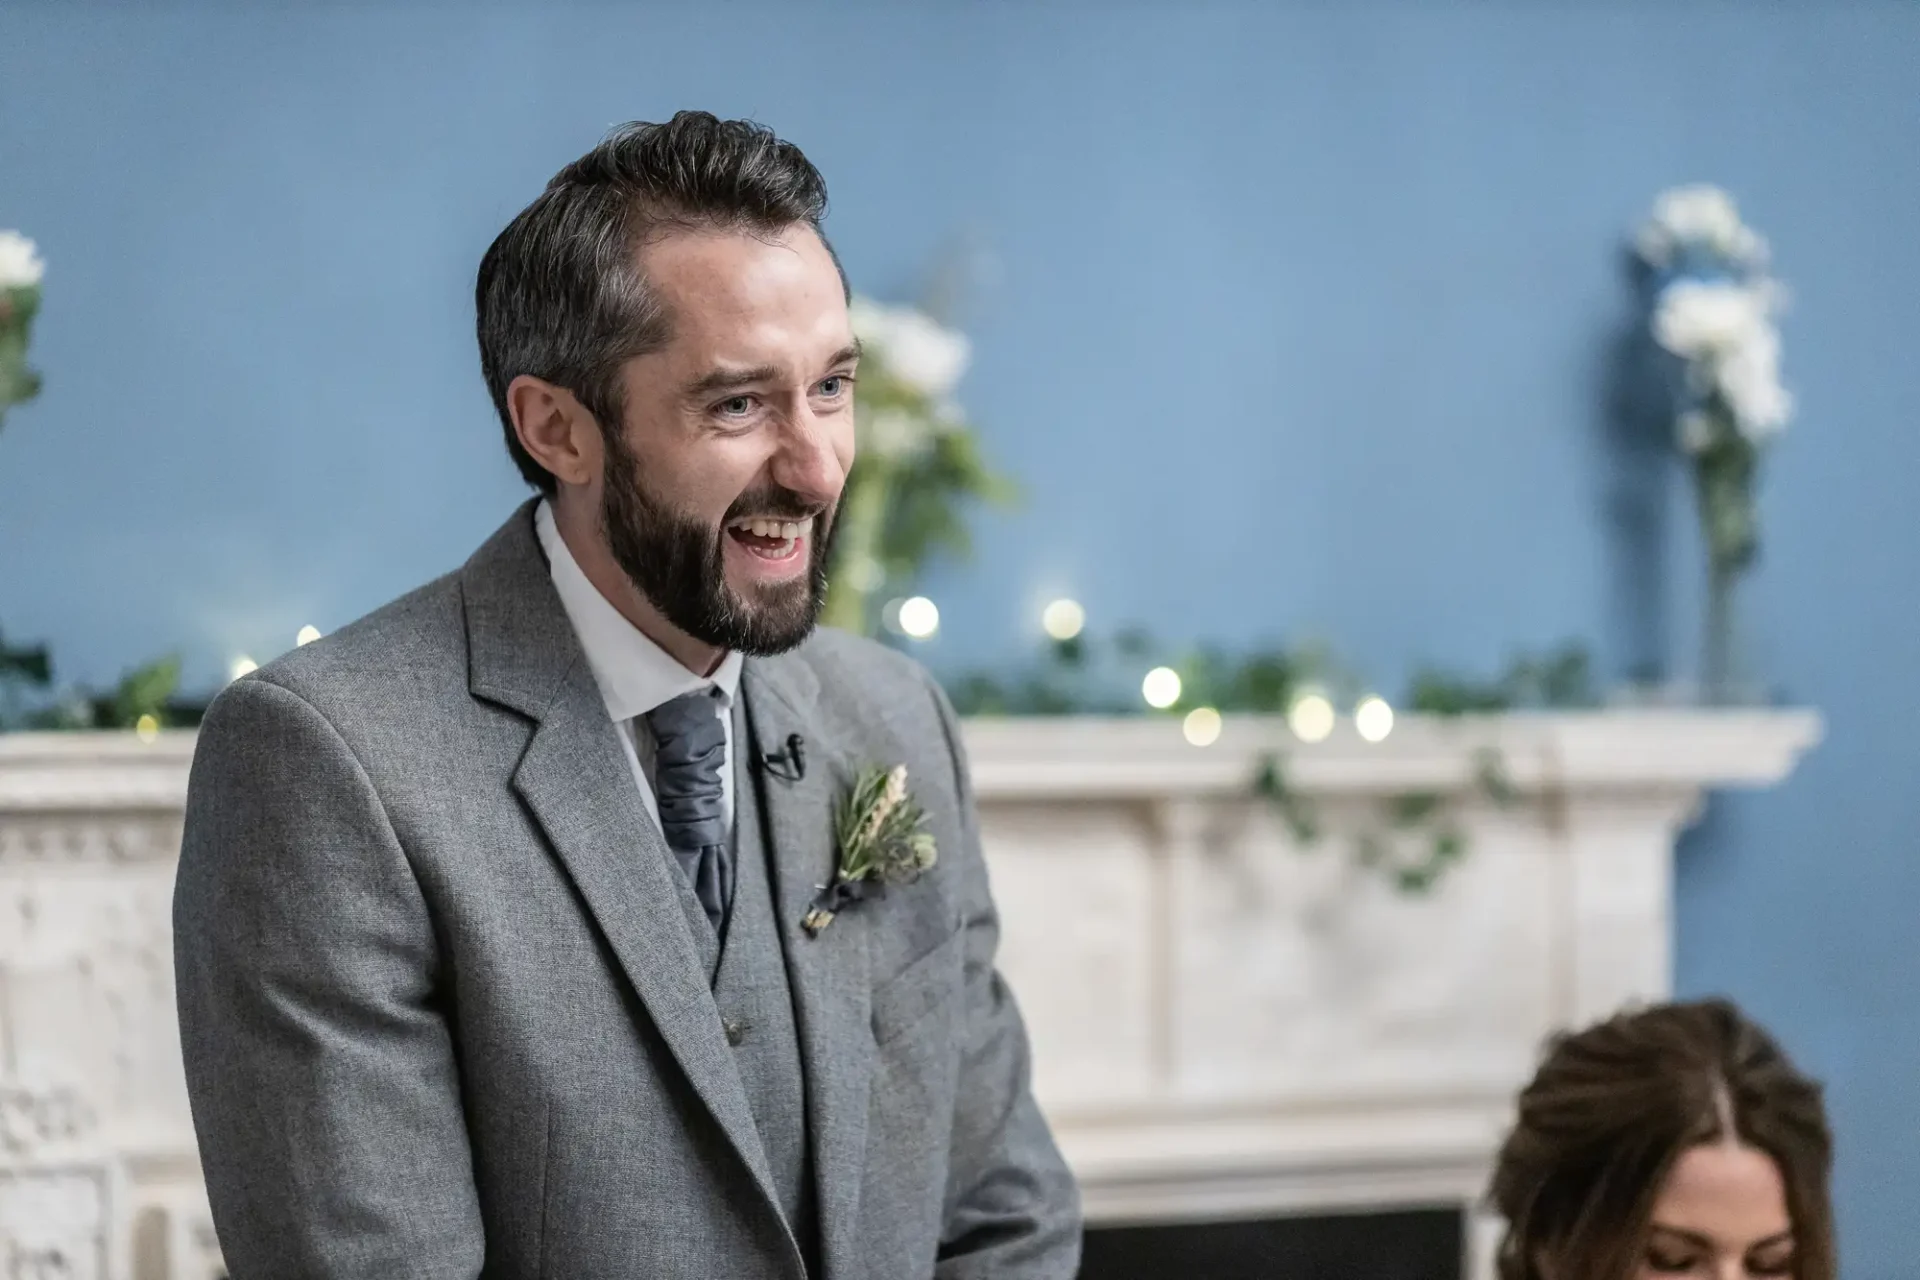 Bearded man in a gray suit with a boutonniere smiling at a wedding, with a woman and decorated mantelpiece in the background.